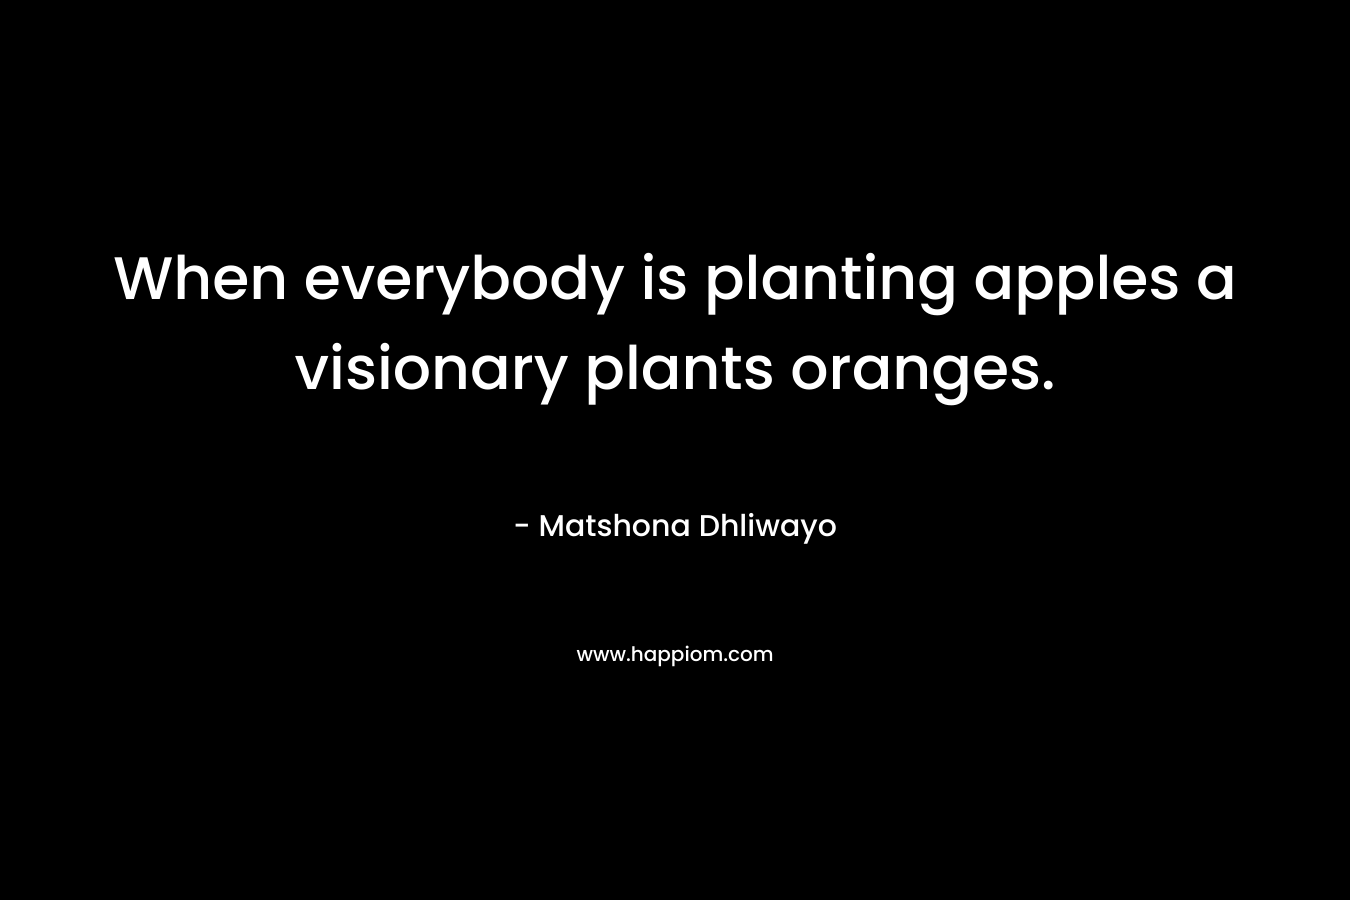 When everybody is planting apples a visionary plants oranges.